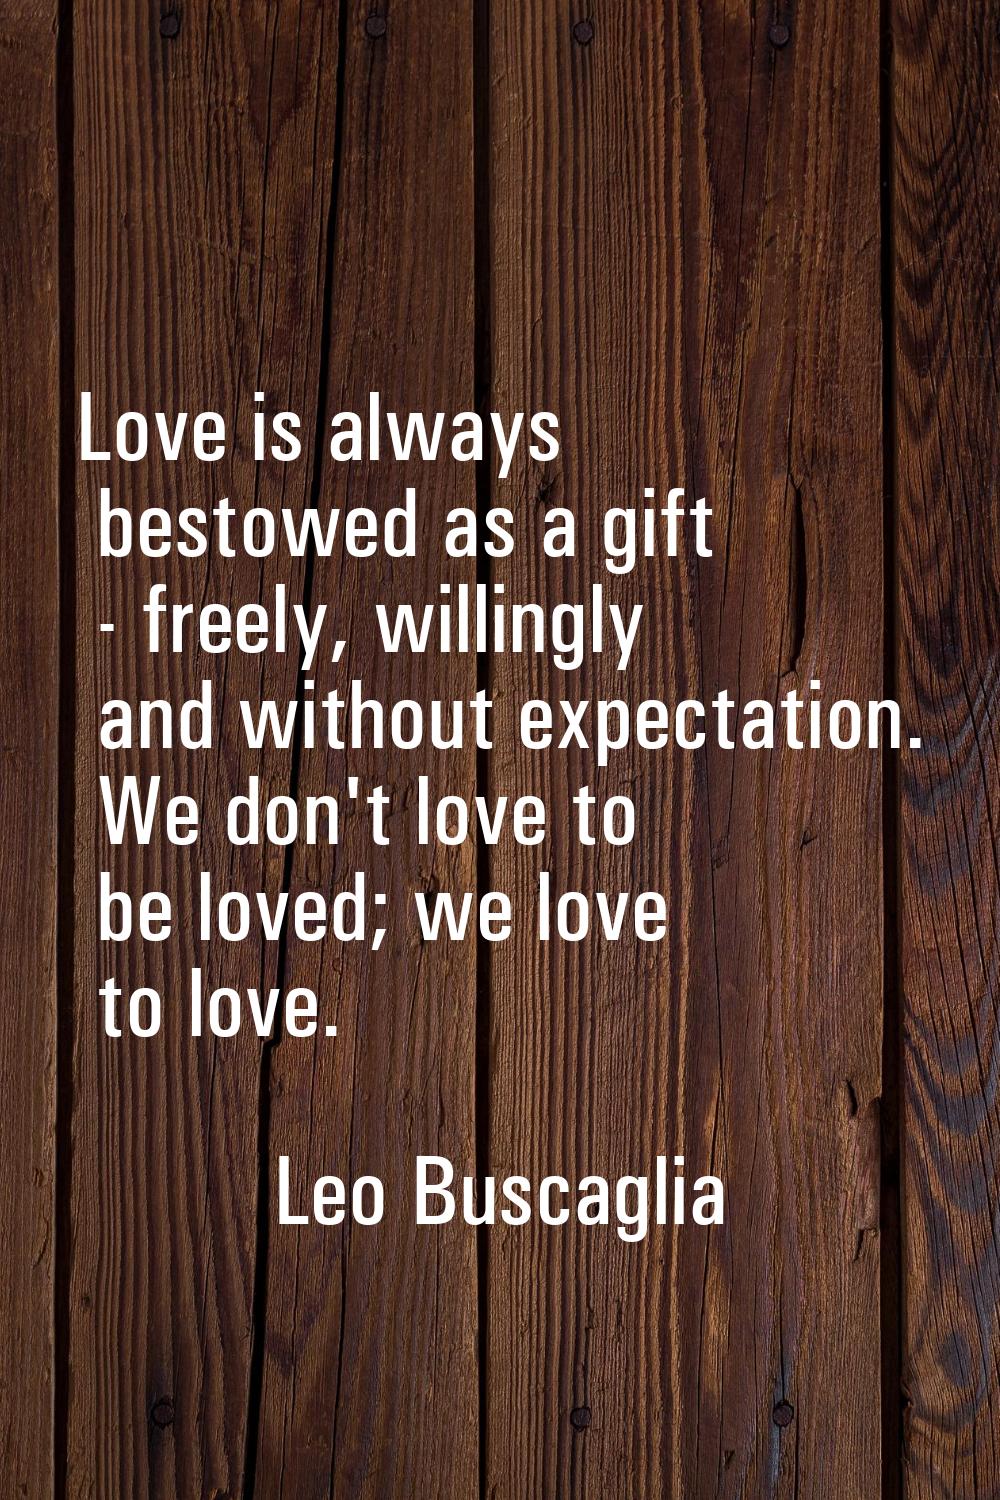 Love is always bestowed as a gift - freely, willingly and without expectation. We don't love to be 